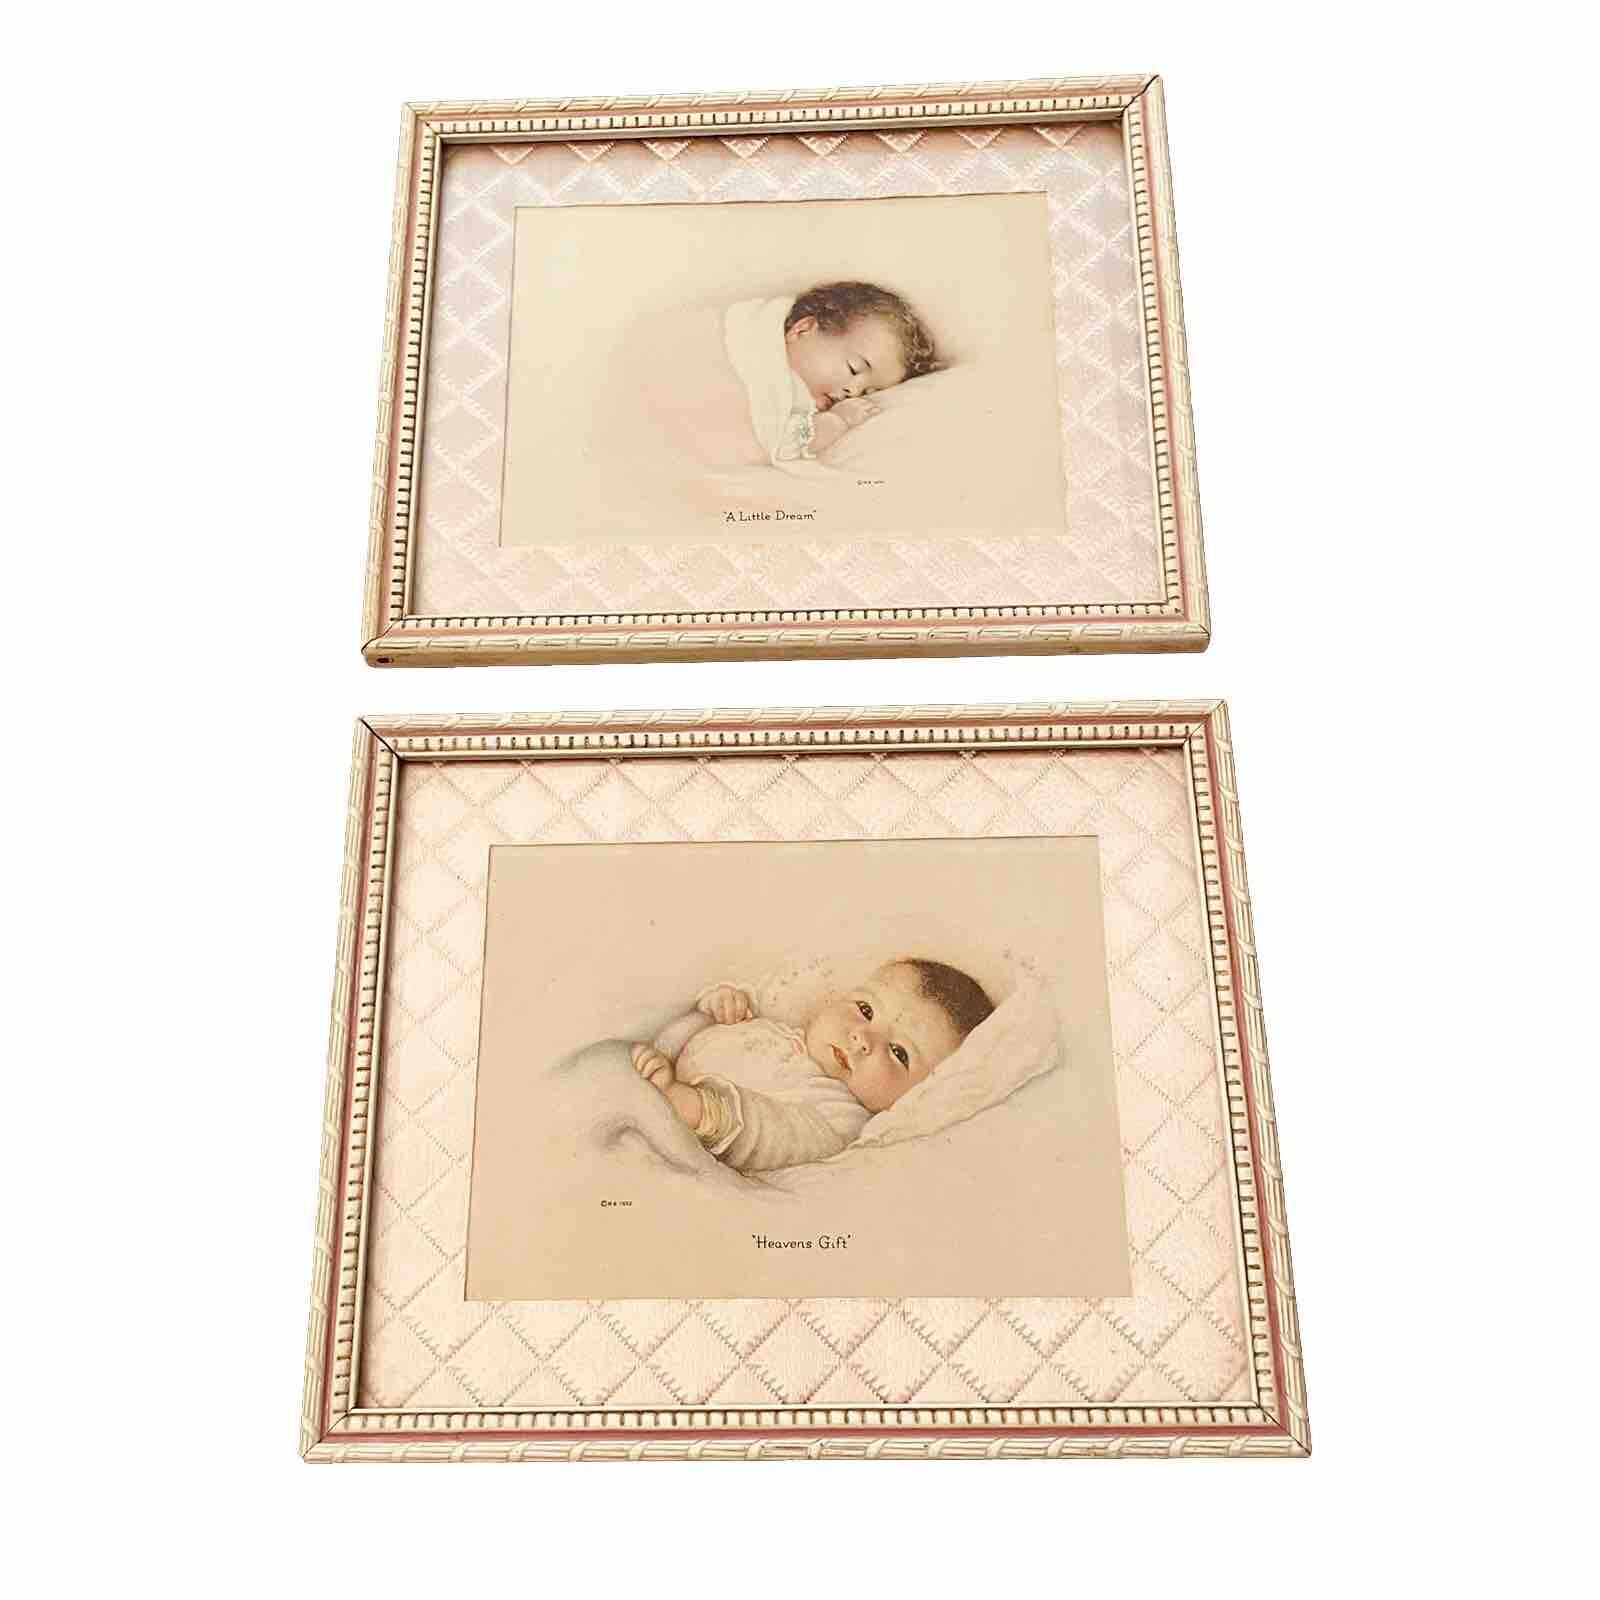 Antique Baby Picture Prints From 1932 In Original Frames. Very Sweet For Nursery